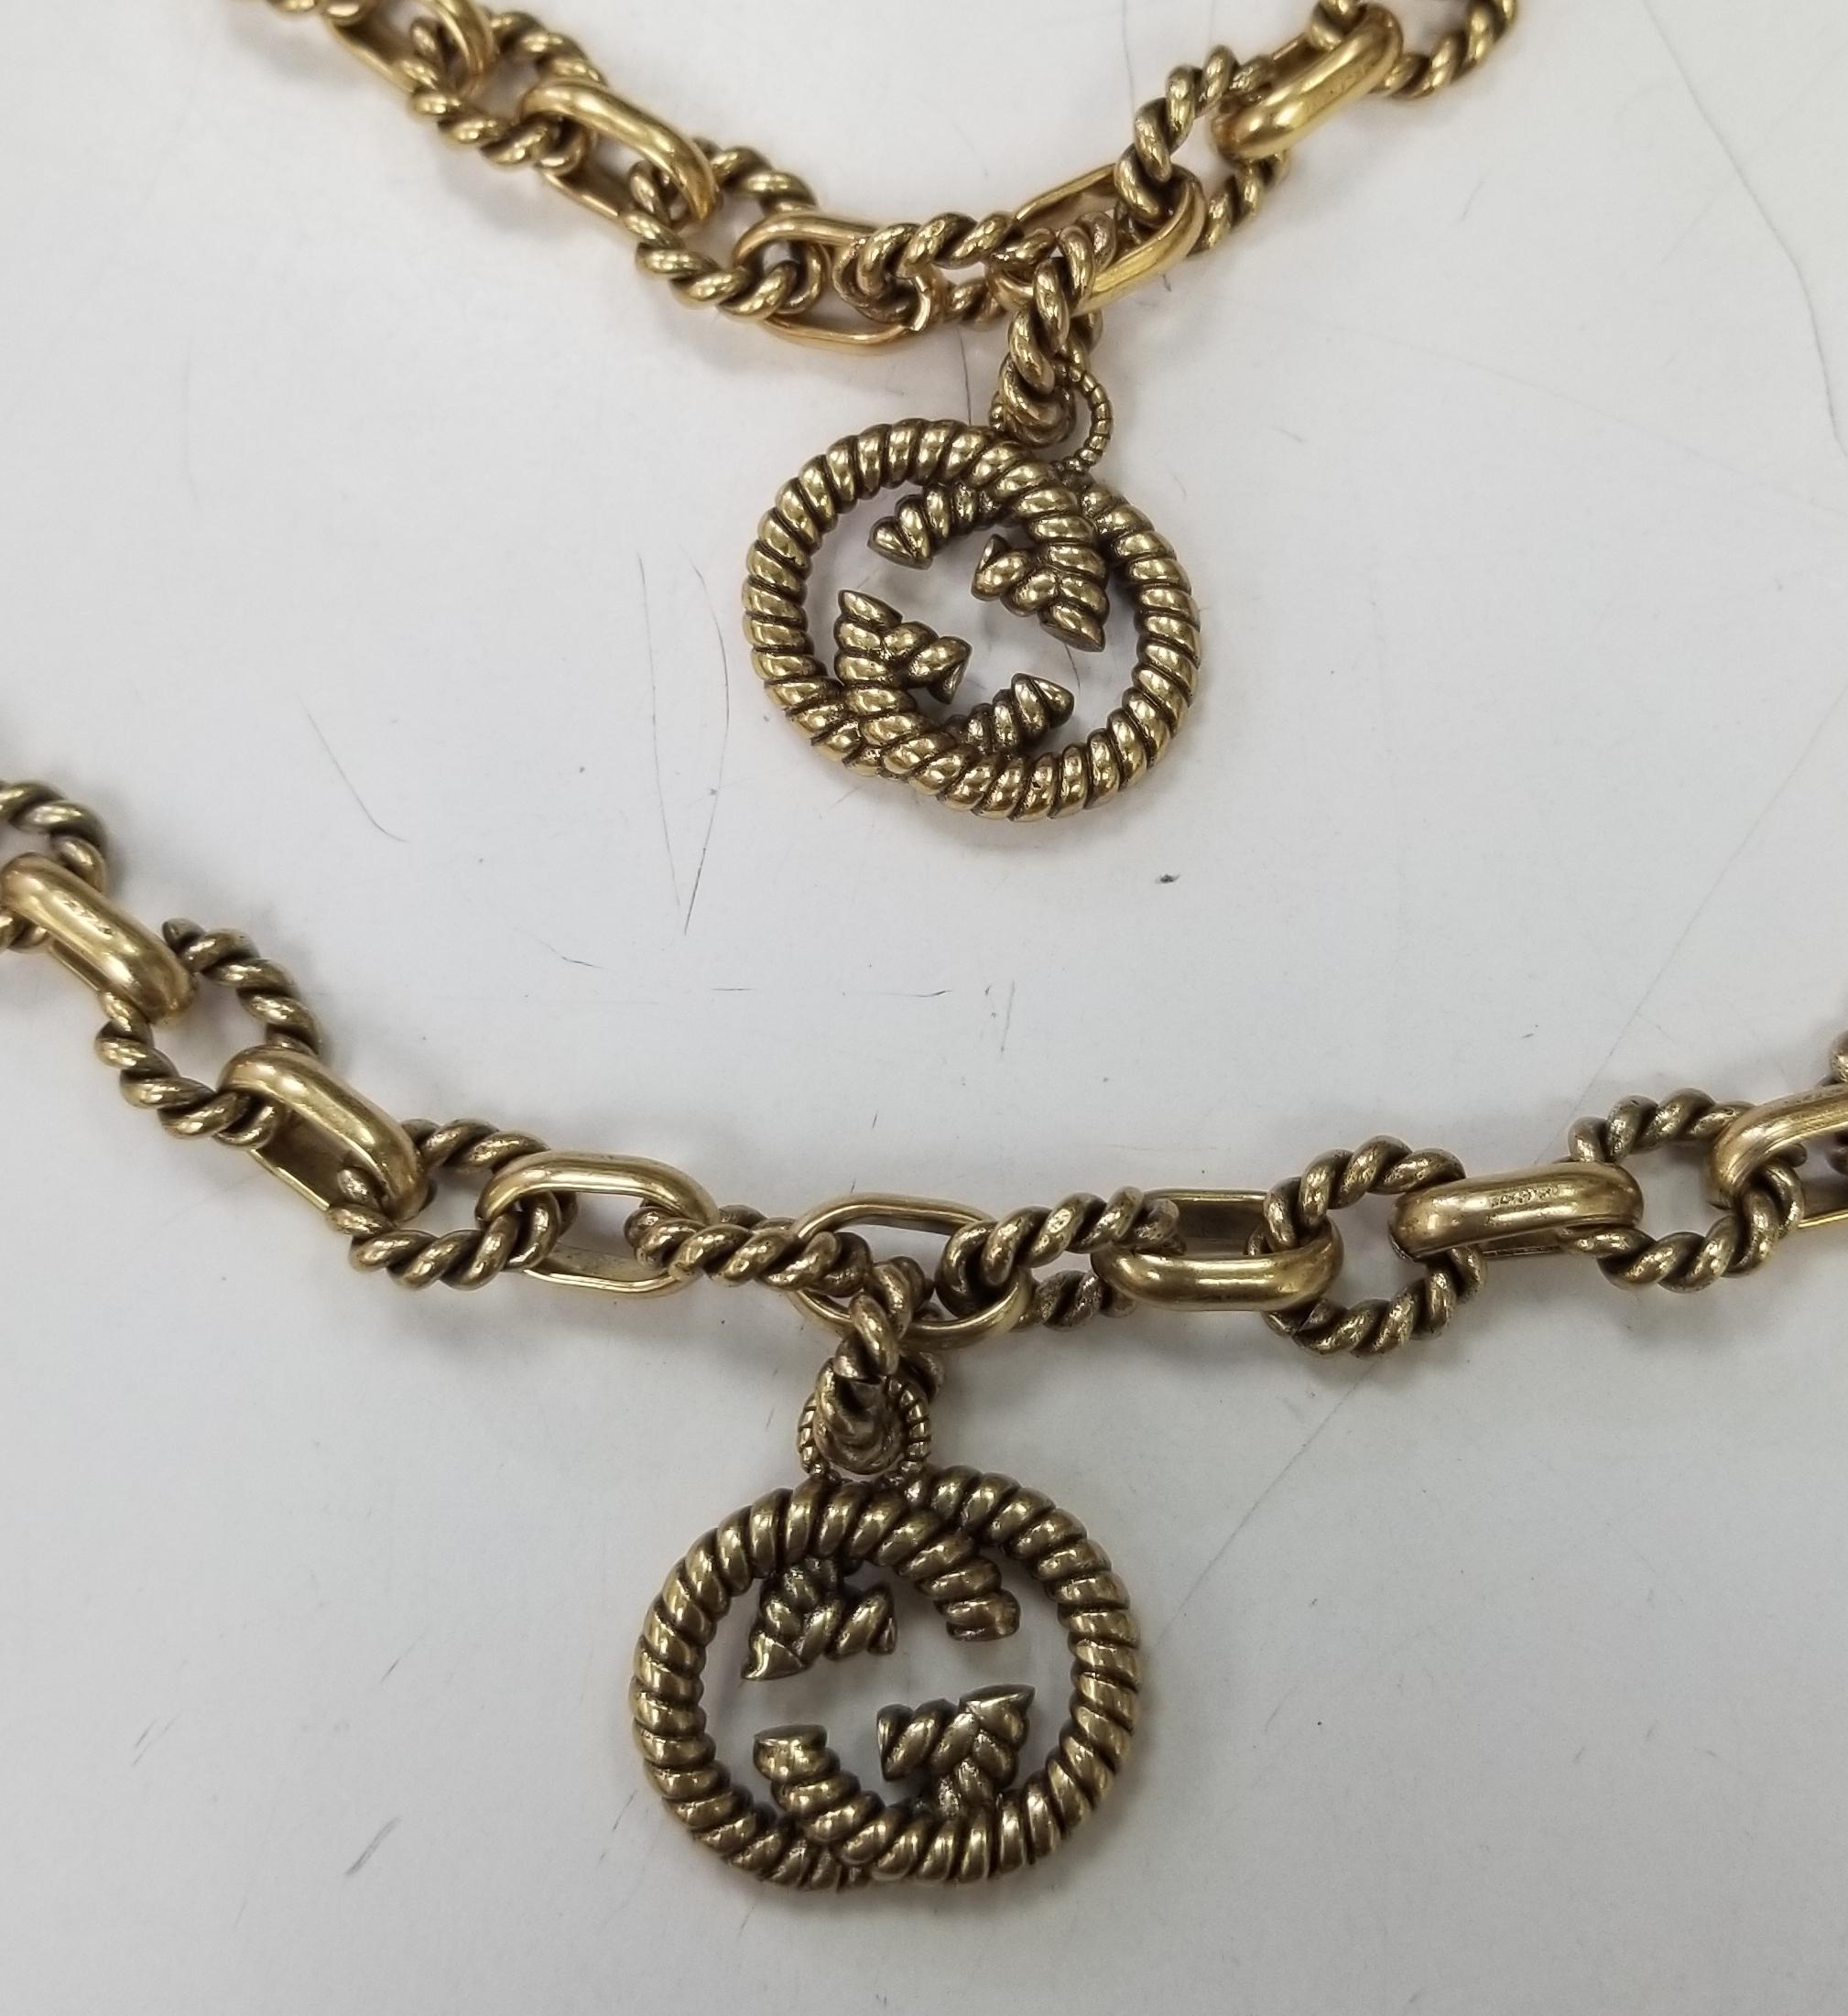 Details
Gucci - The rope-engraved interlocked GG pendant on Gucci's necklace and matching bracelet nods to love knots that have been used in jewellery since the ancient Egyptians as a symbol of everlasting love. It's crafted in Italy from antiqued